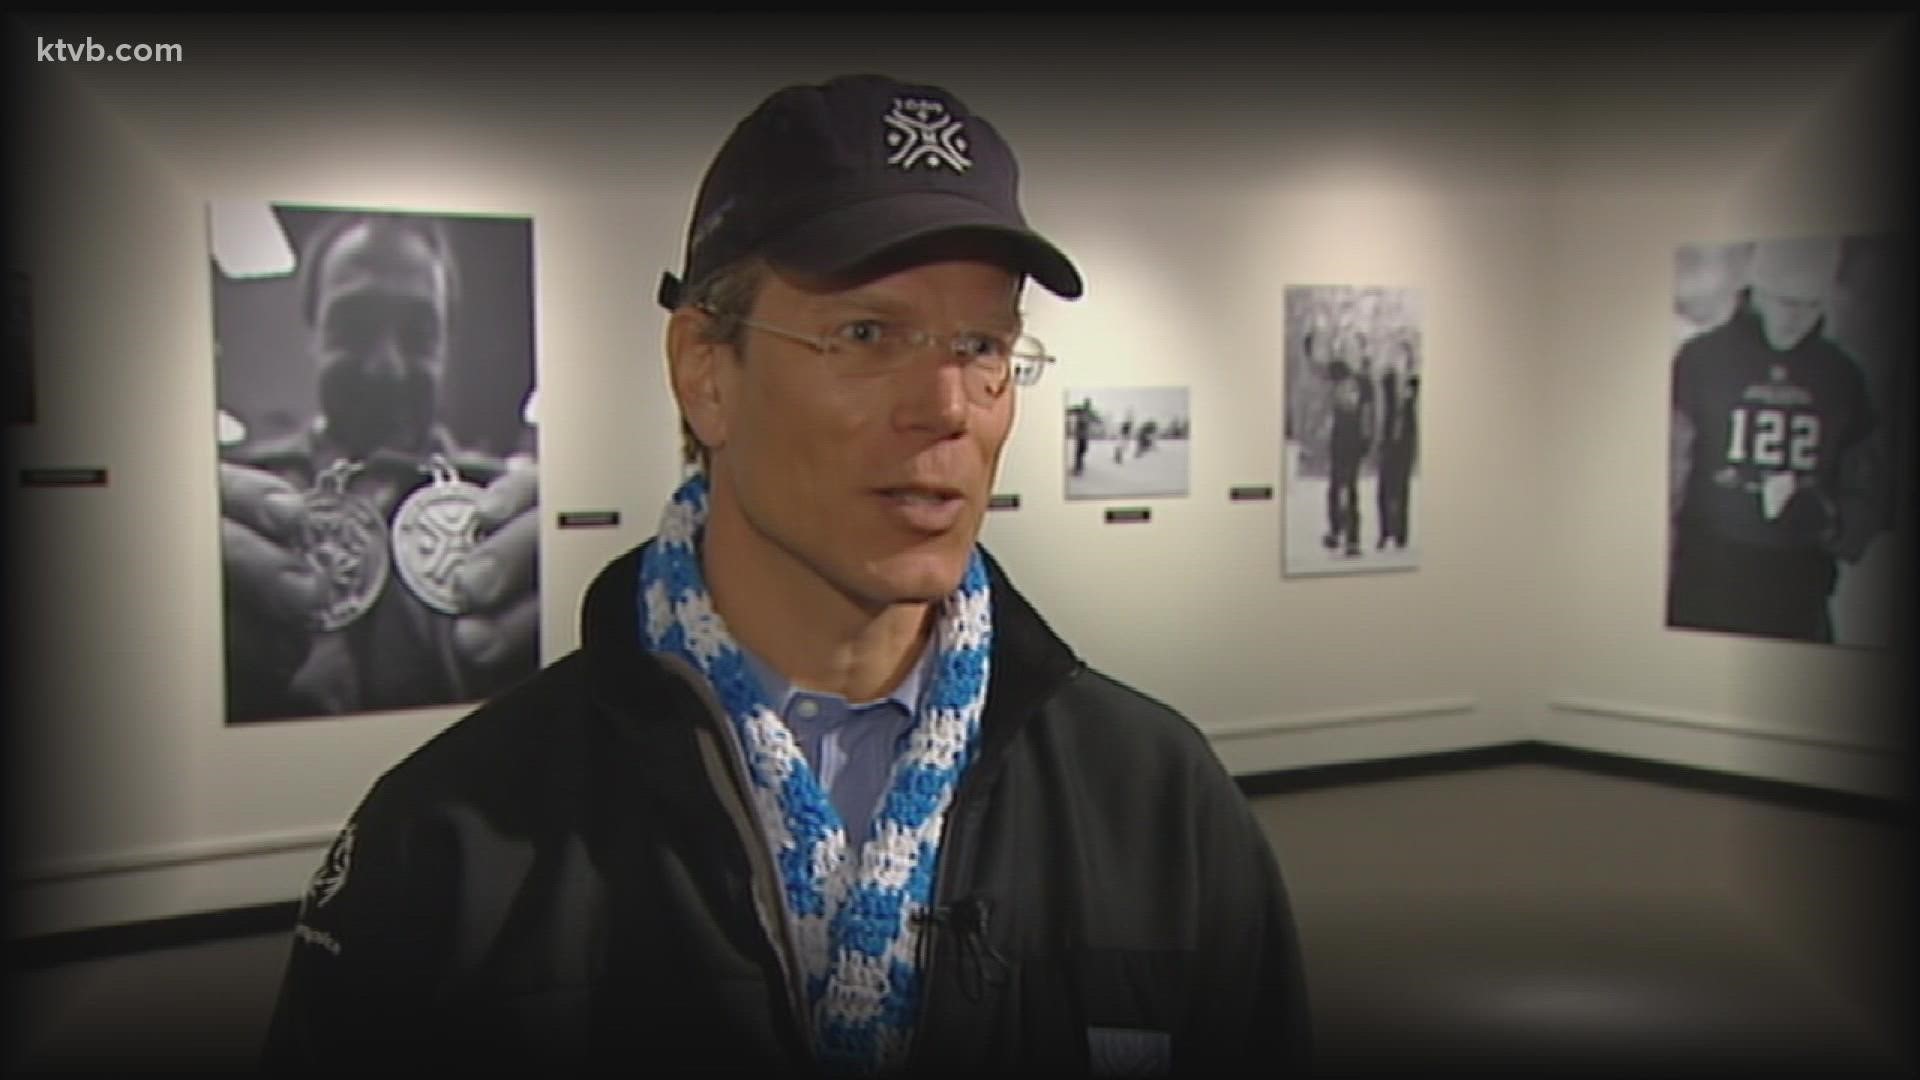 James "Jimmy" Grossman, 56, helped bring the 2009 Winter Special Olympics to Idaho.